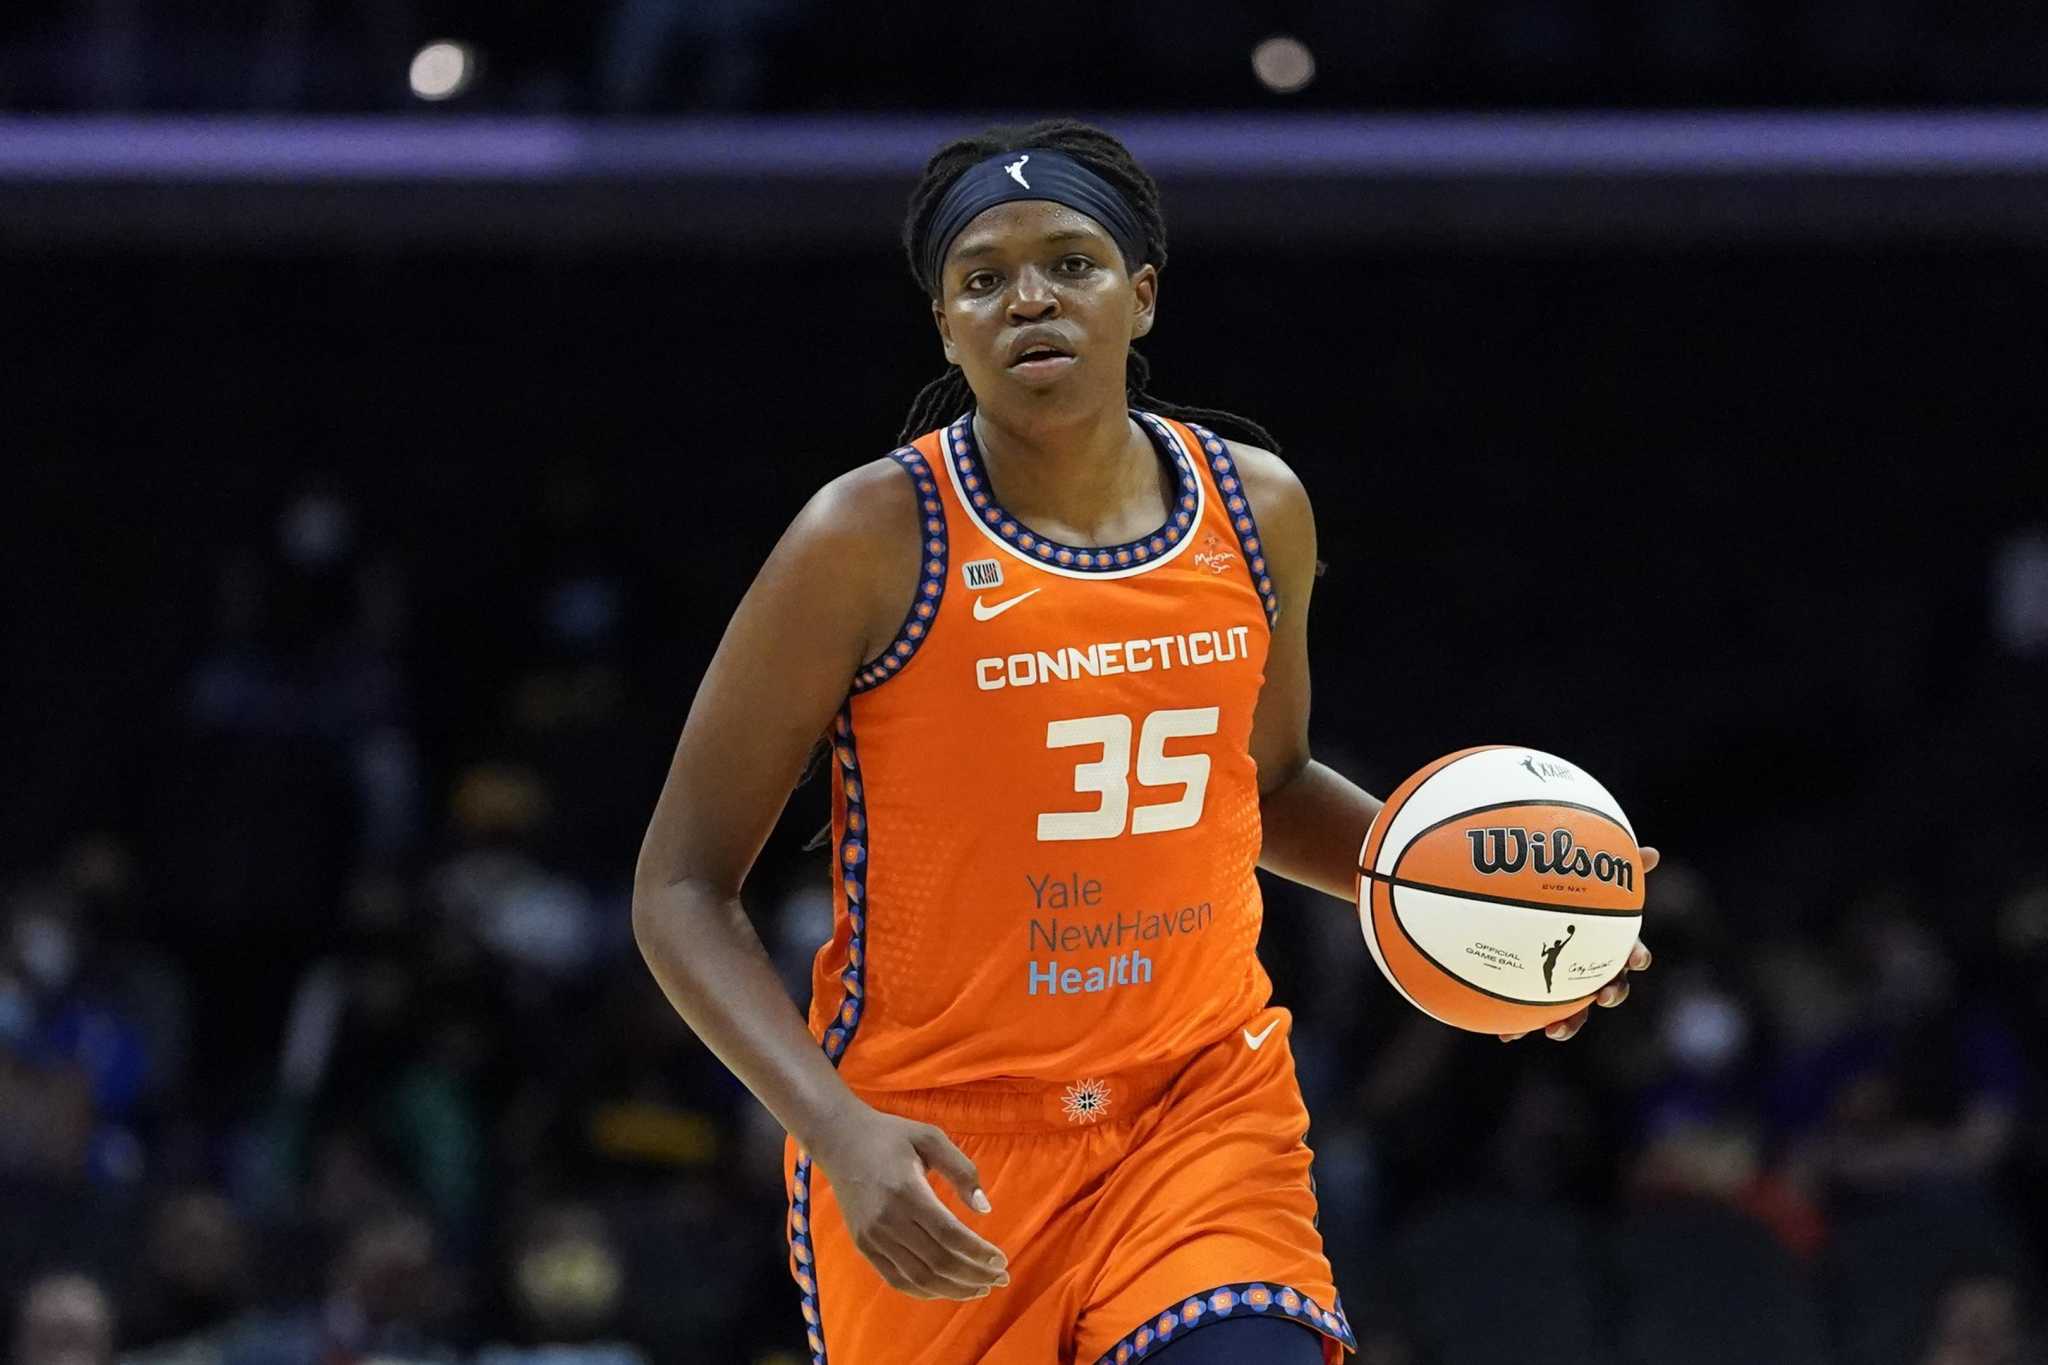 WNBA: Chicago Sky overwhelmed by Connecticut Sun in paint, on